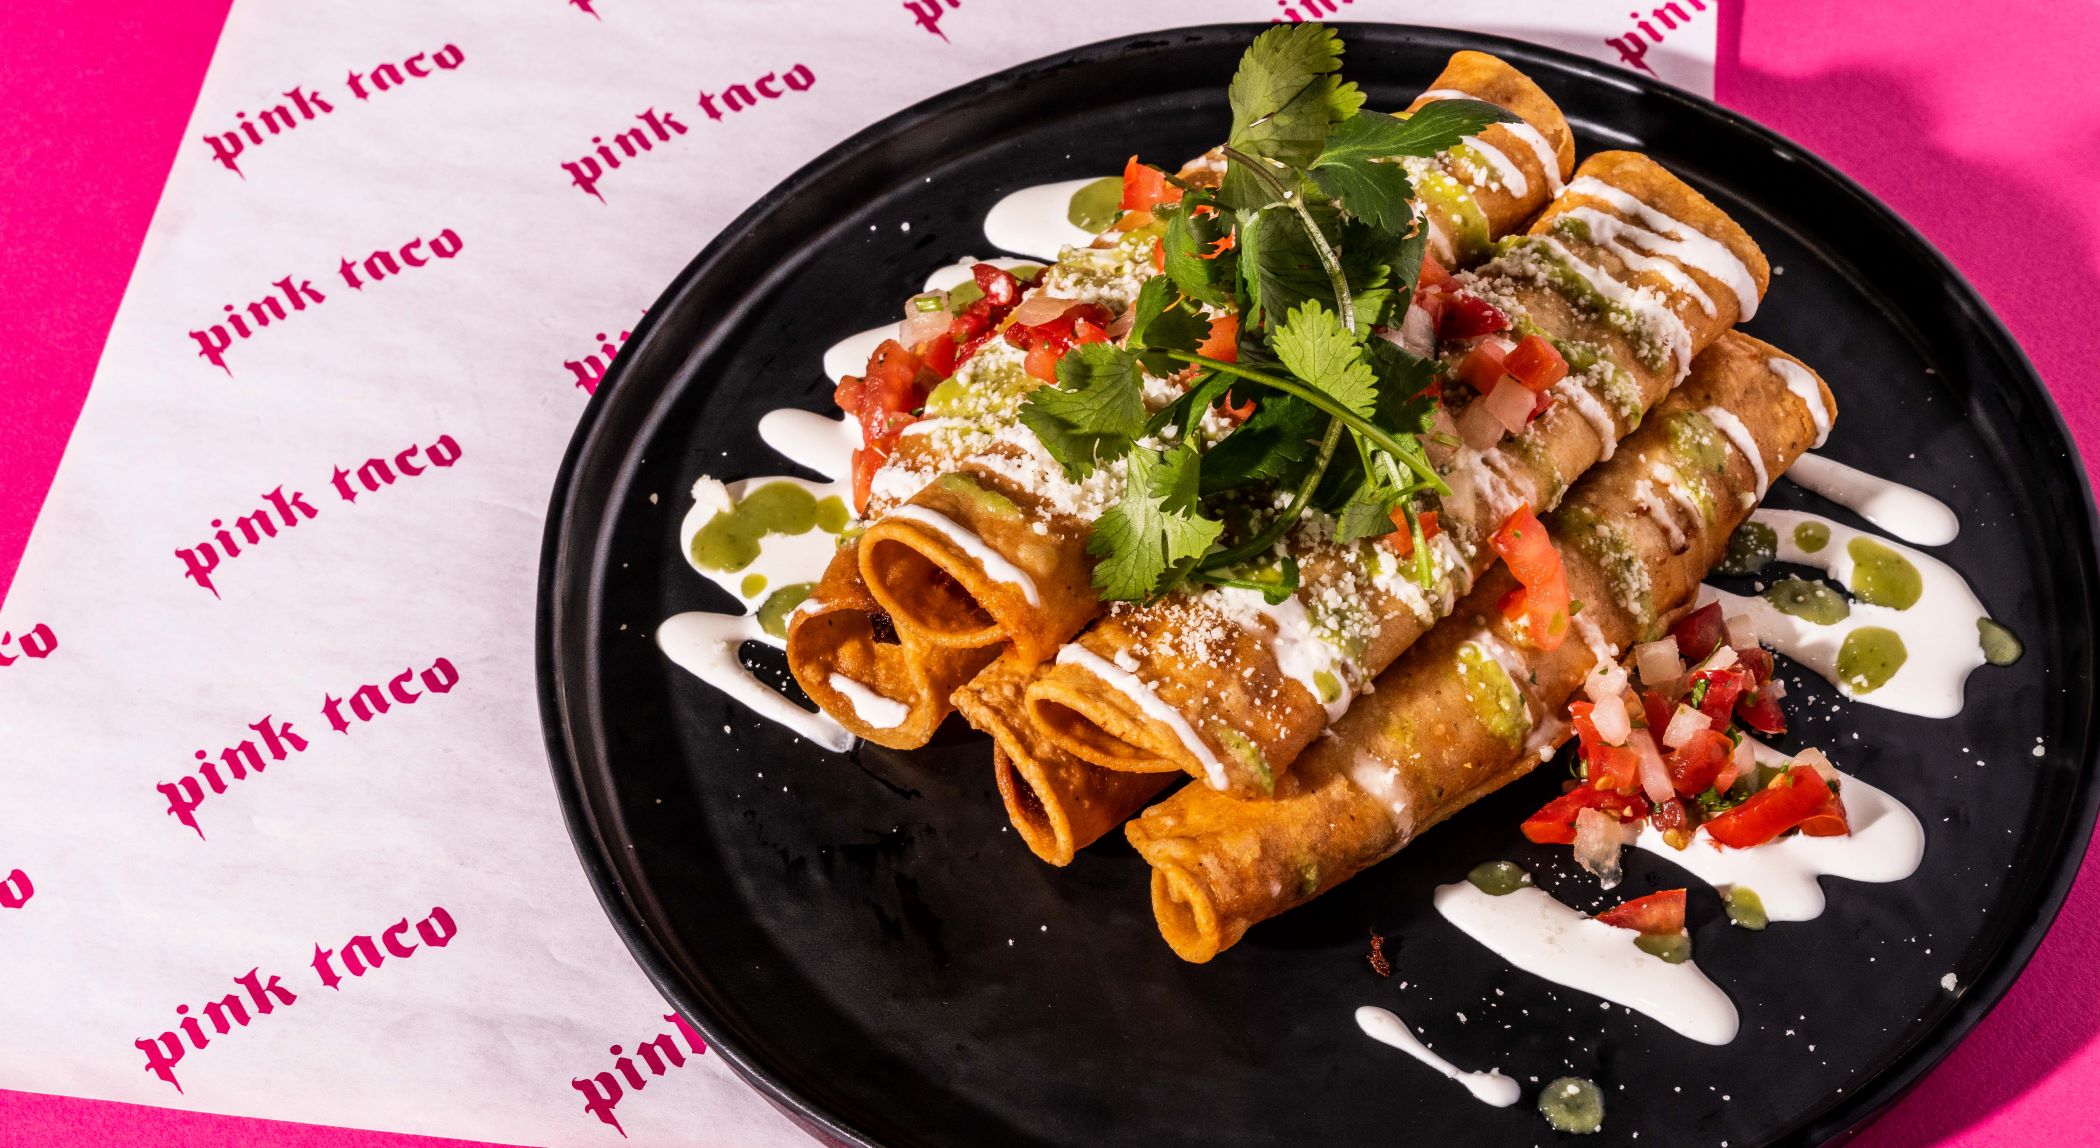 An image of the taquitos from Pink Taco.